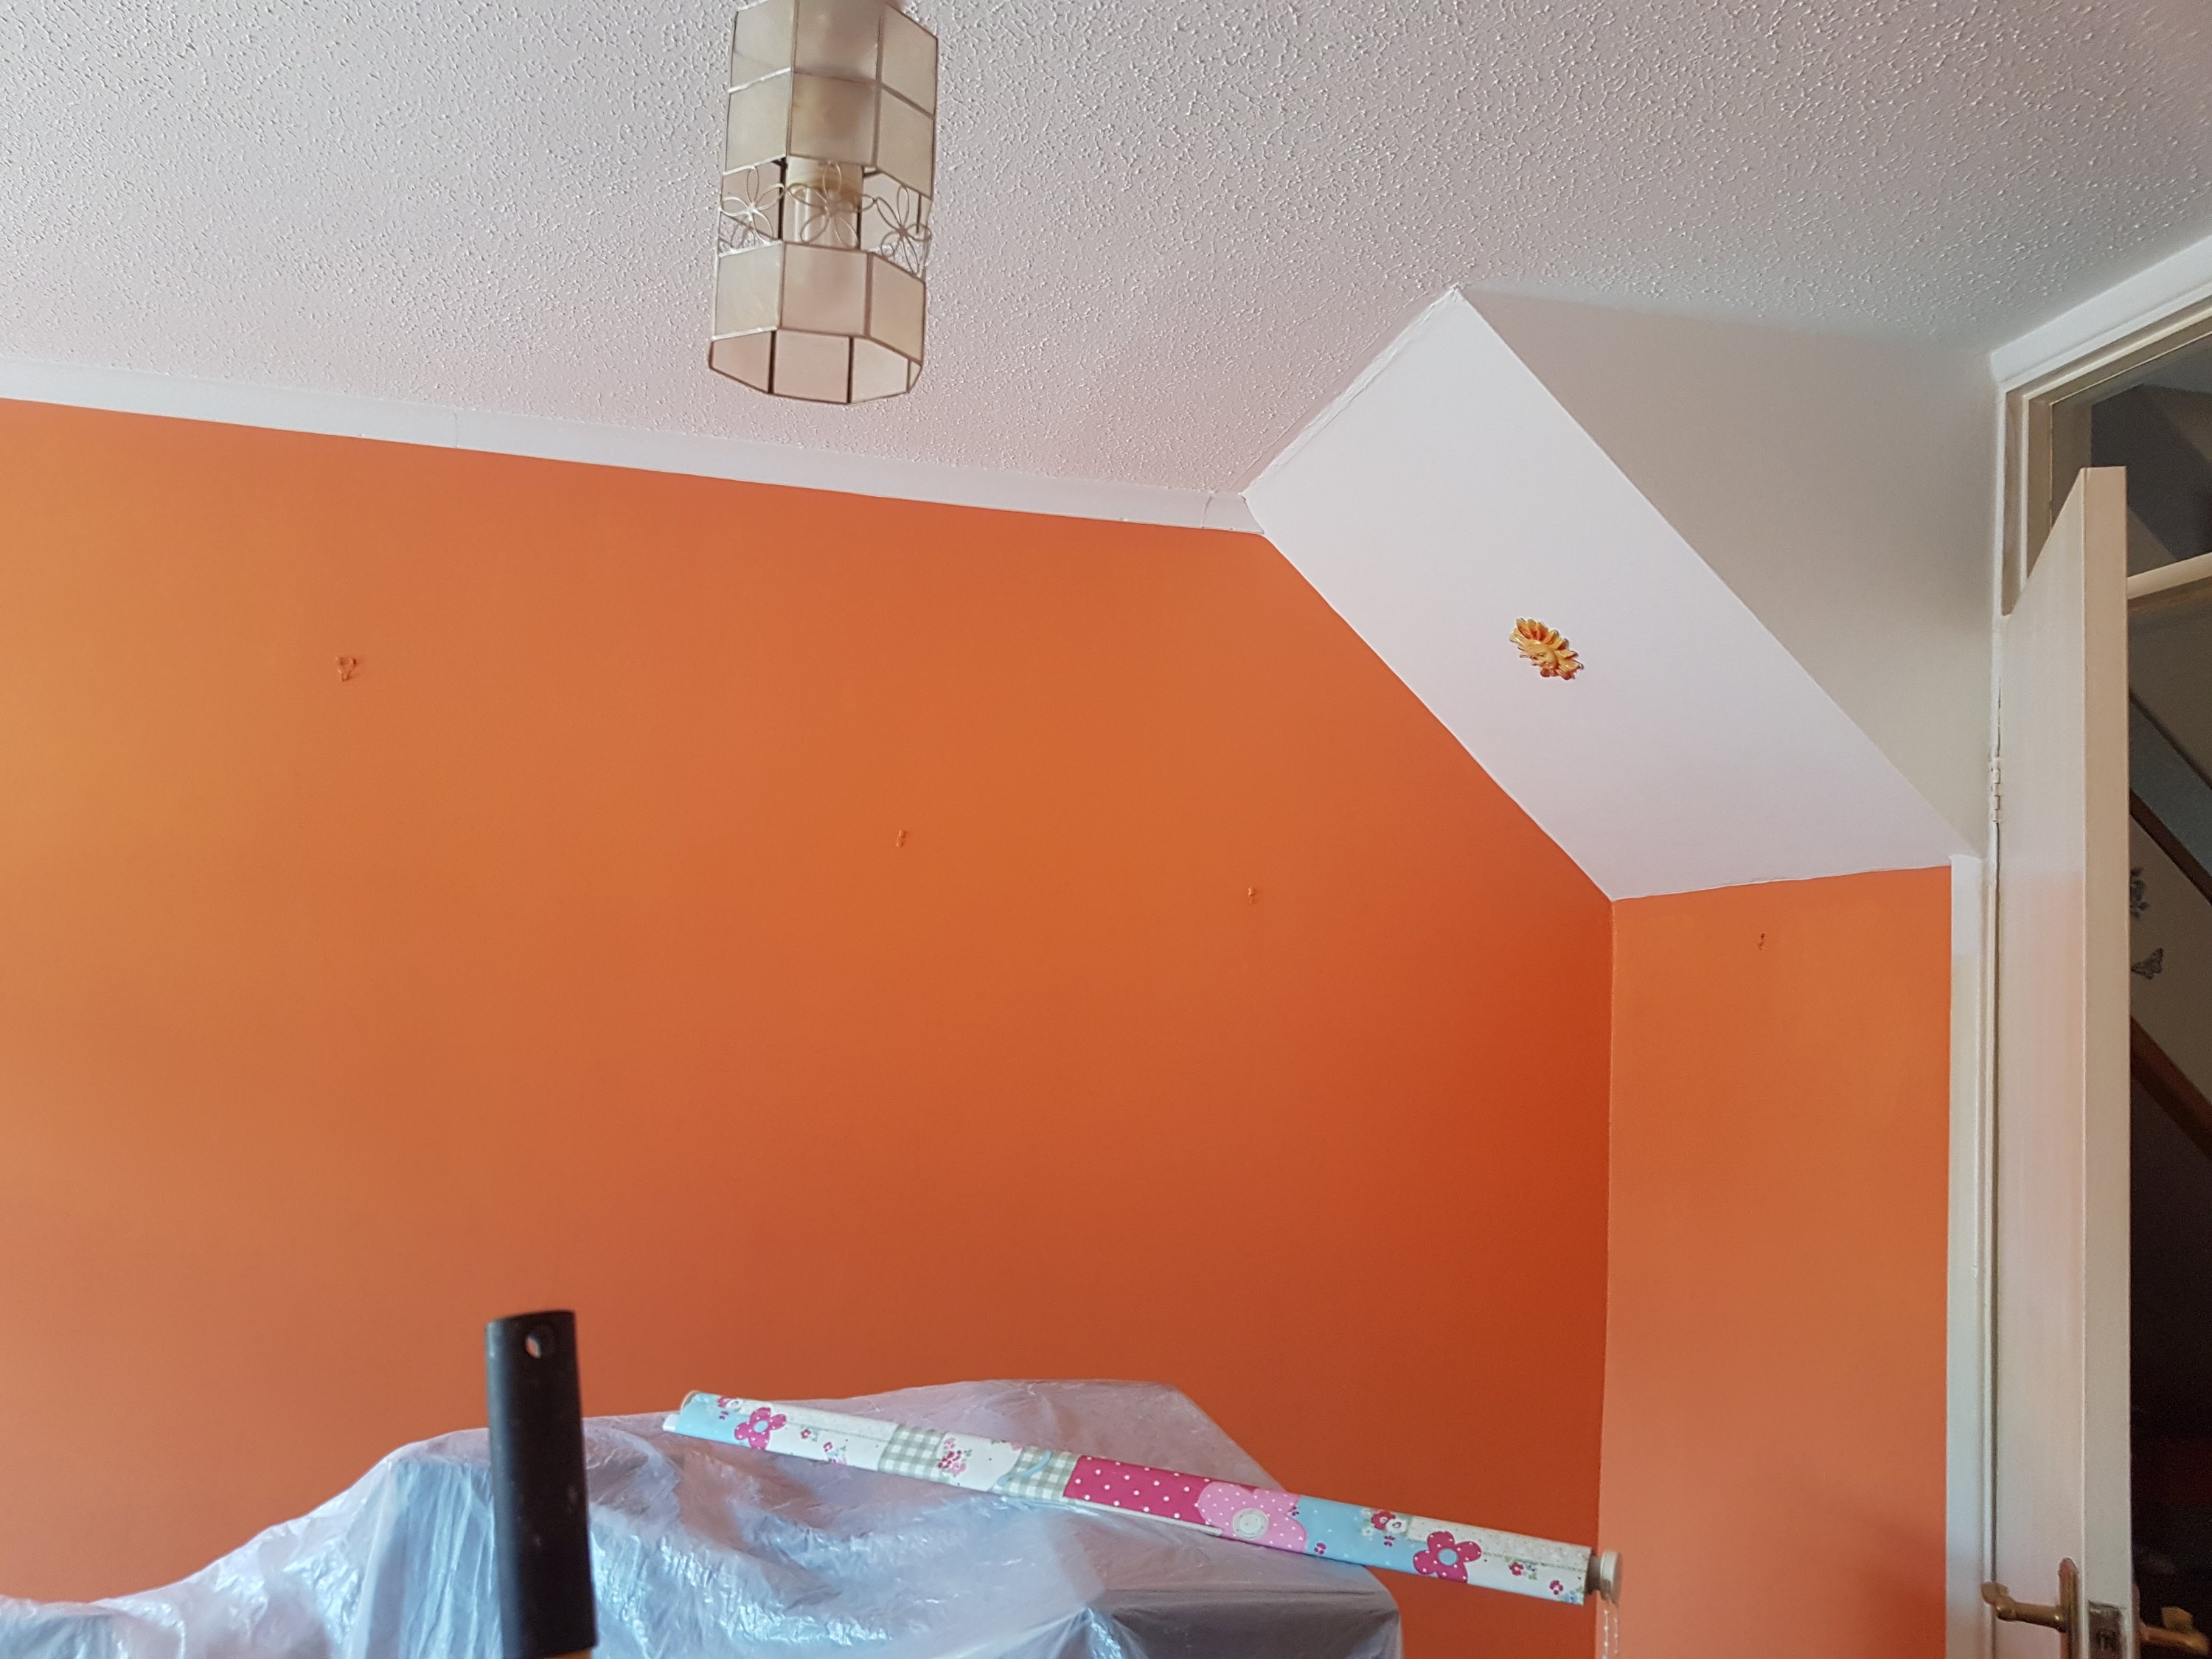 How to prep walls for painting after stripping wallpaper - Painting and  Decorating Bedford, Bedfordshire